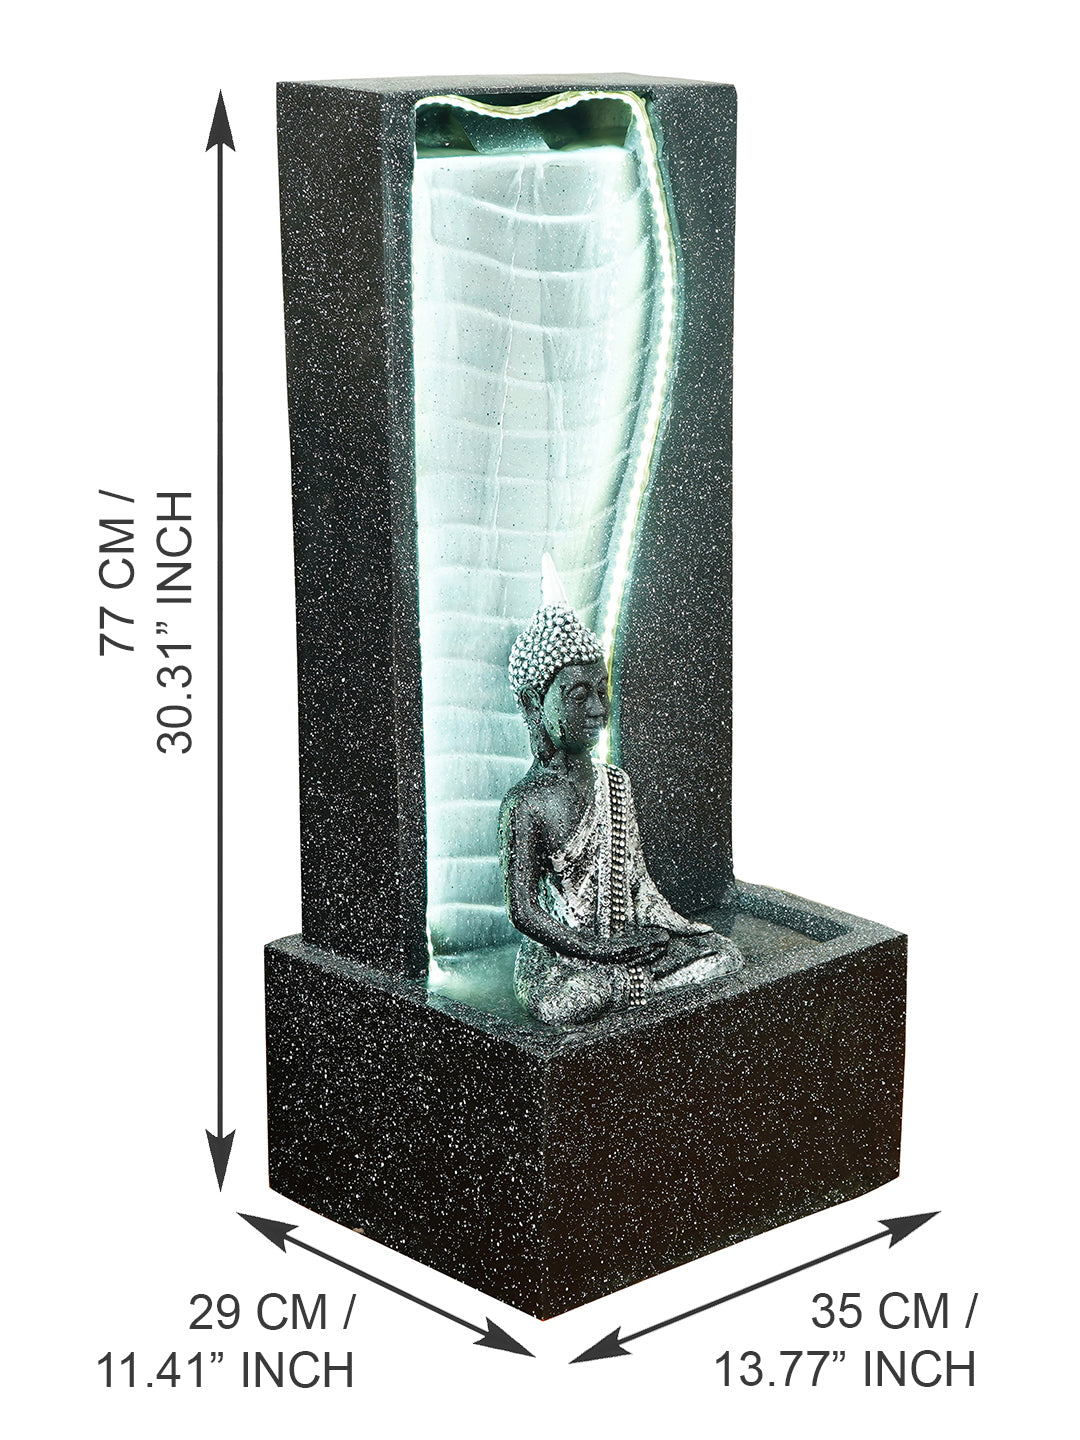 Polystone Grey Meditating Buddha Water Fountain with LED Light Effects and Water Pump for Home/Office Decoration 1